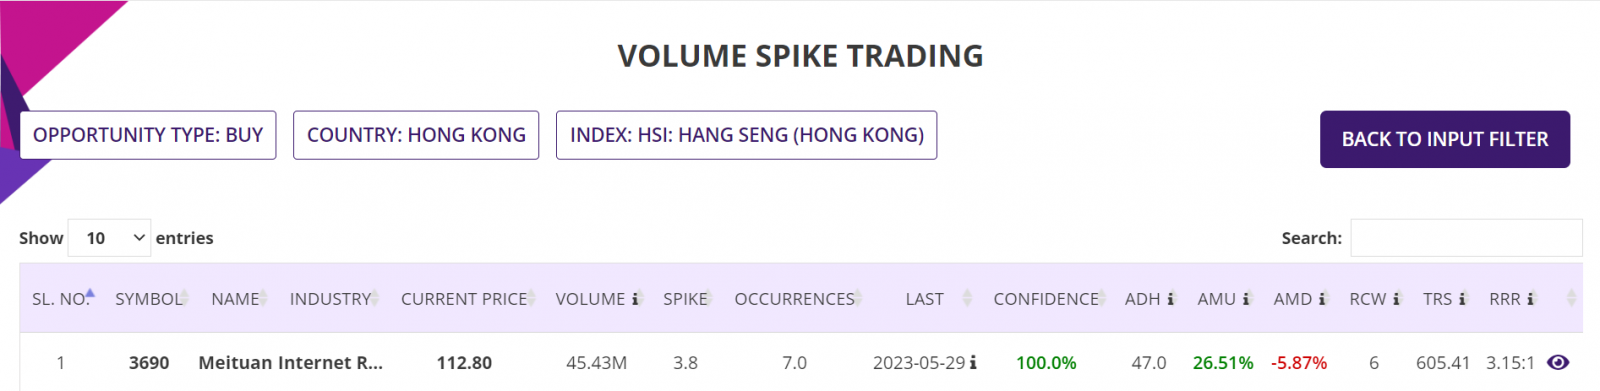 Volume Spike Trading, Summary Report, HSI Stock Index